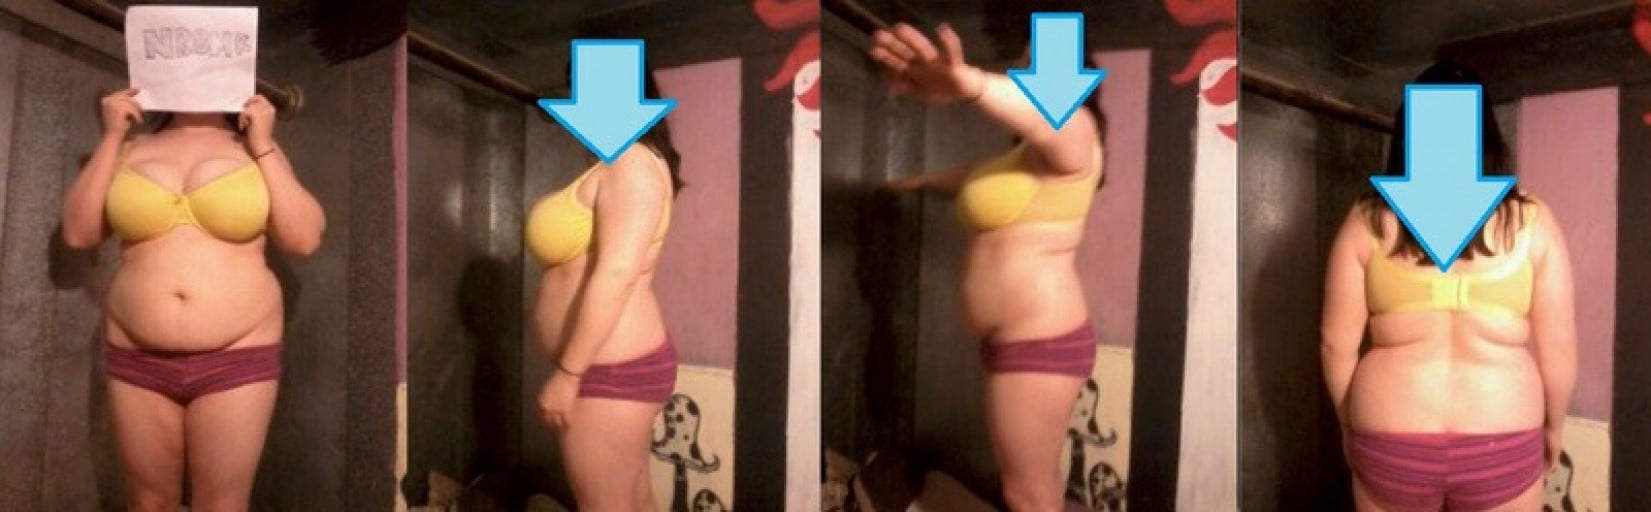 A before and after photo of a 5'5" female showing a snapshot of 201 pounds at a height of 5'5